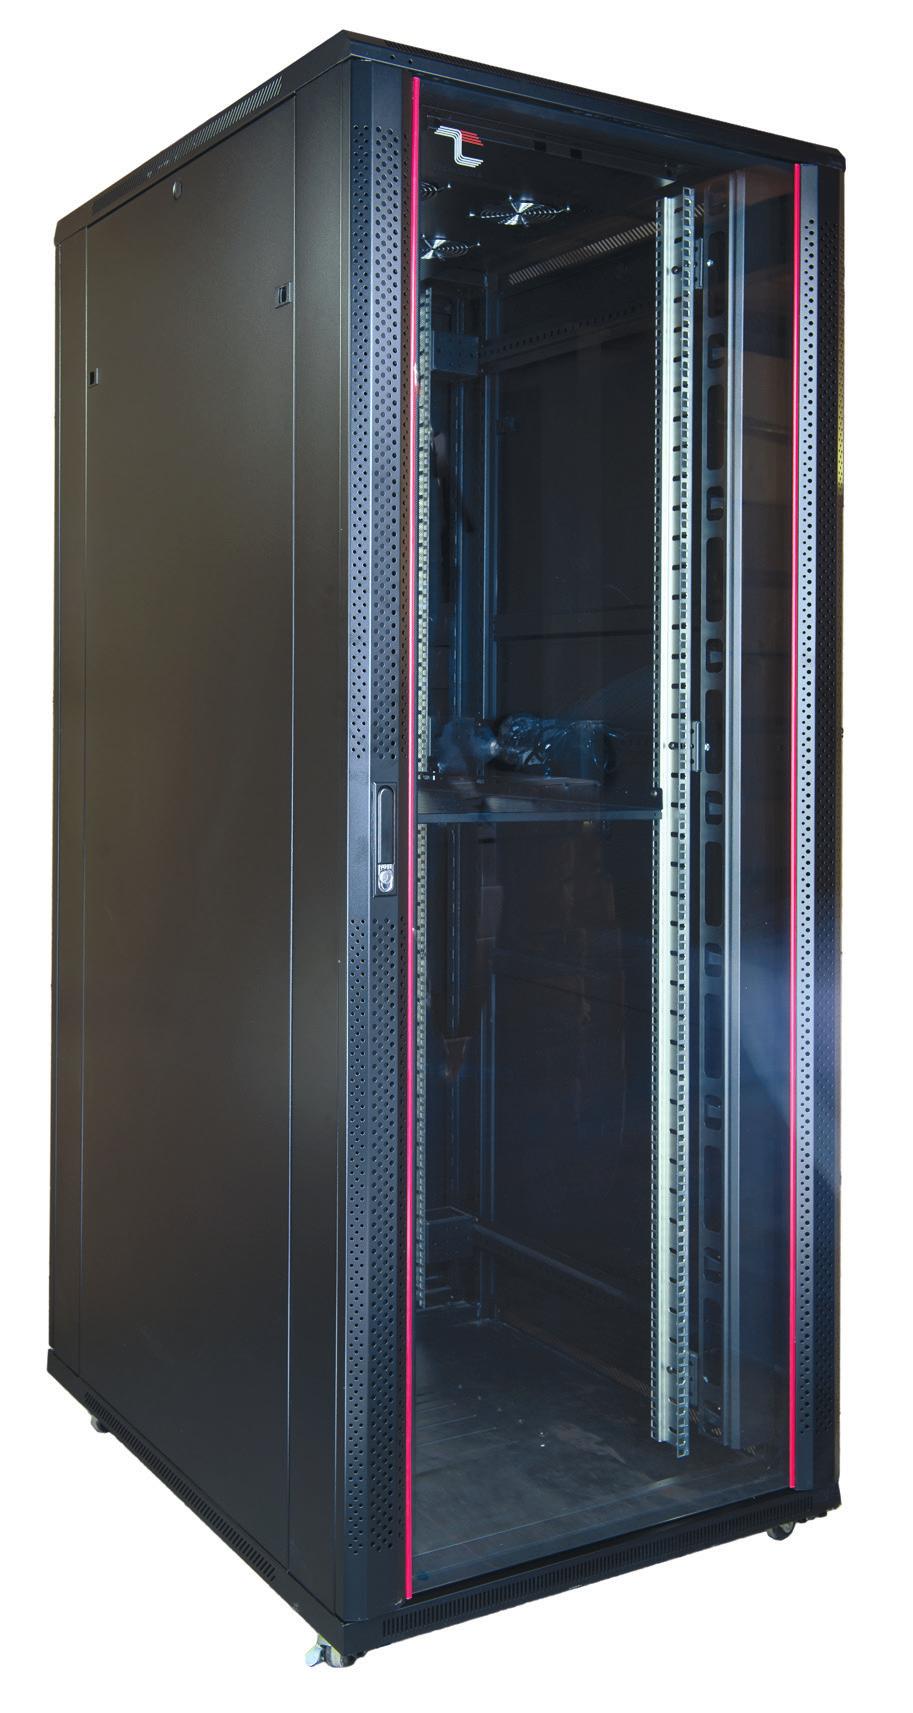 rat-proof Rack s side panel can be easily assembled.